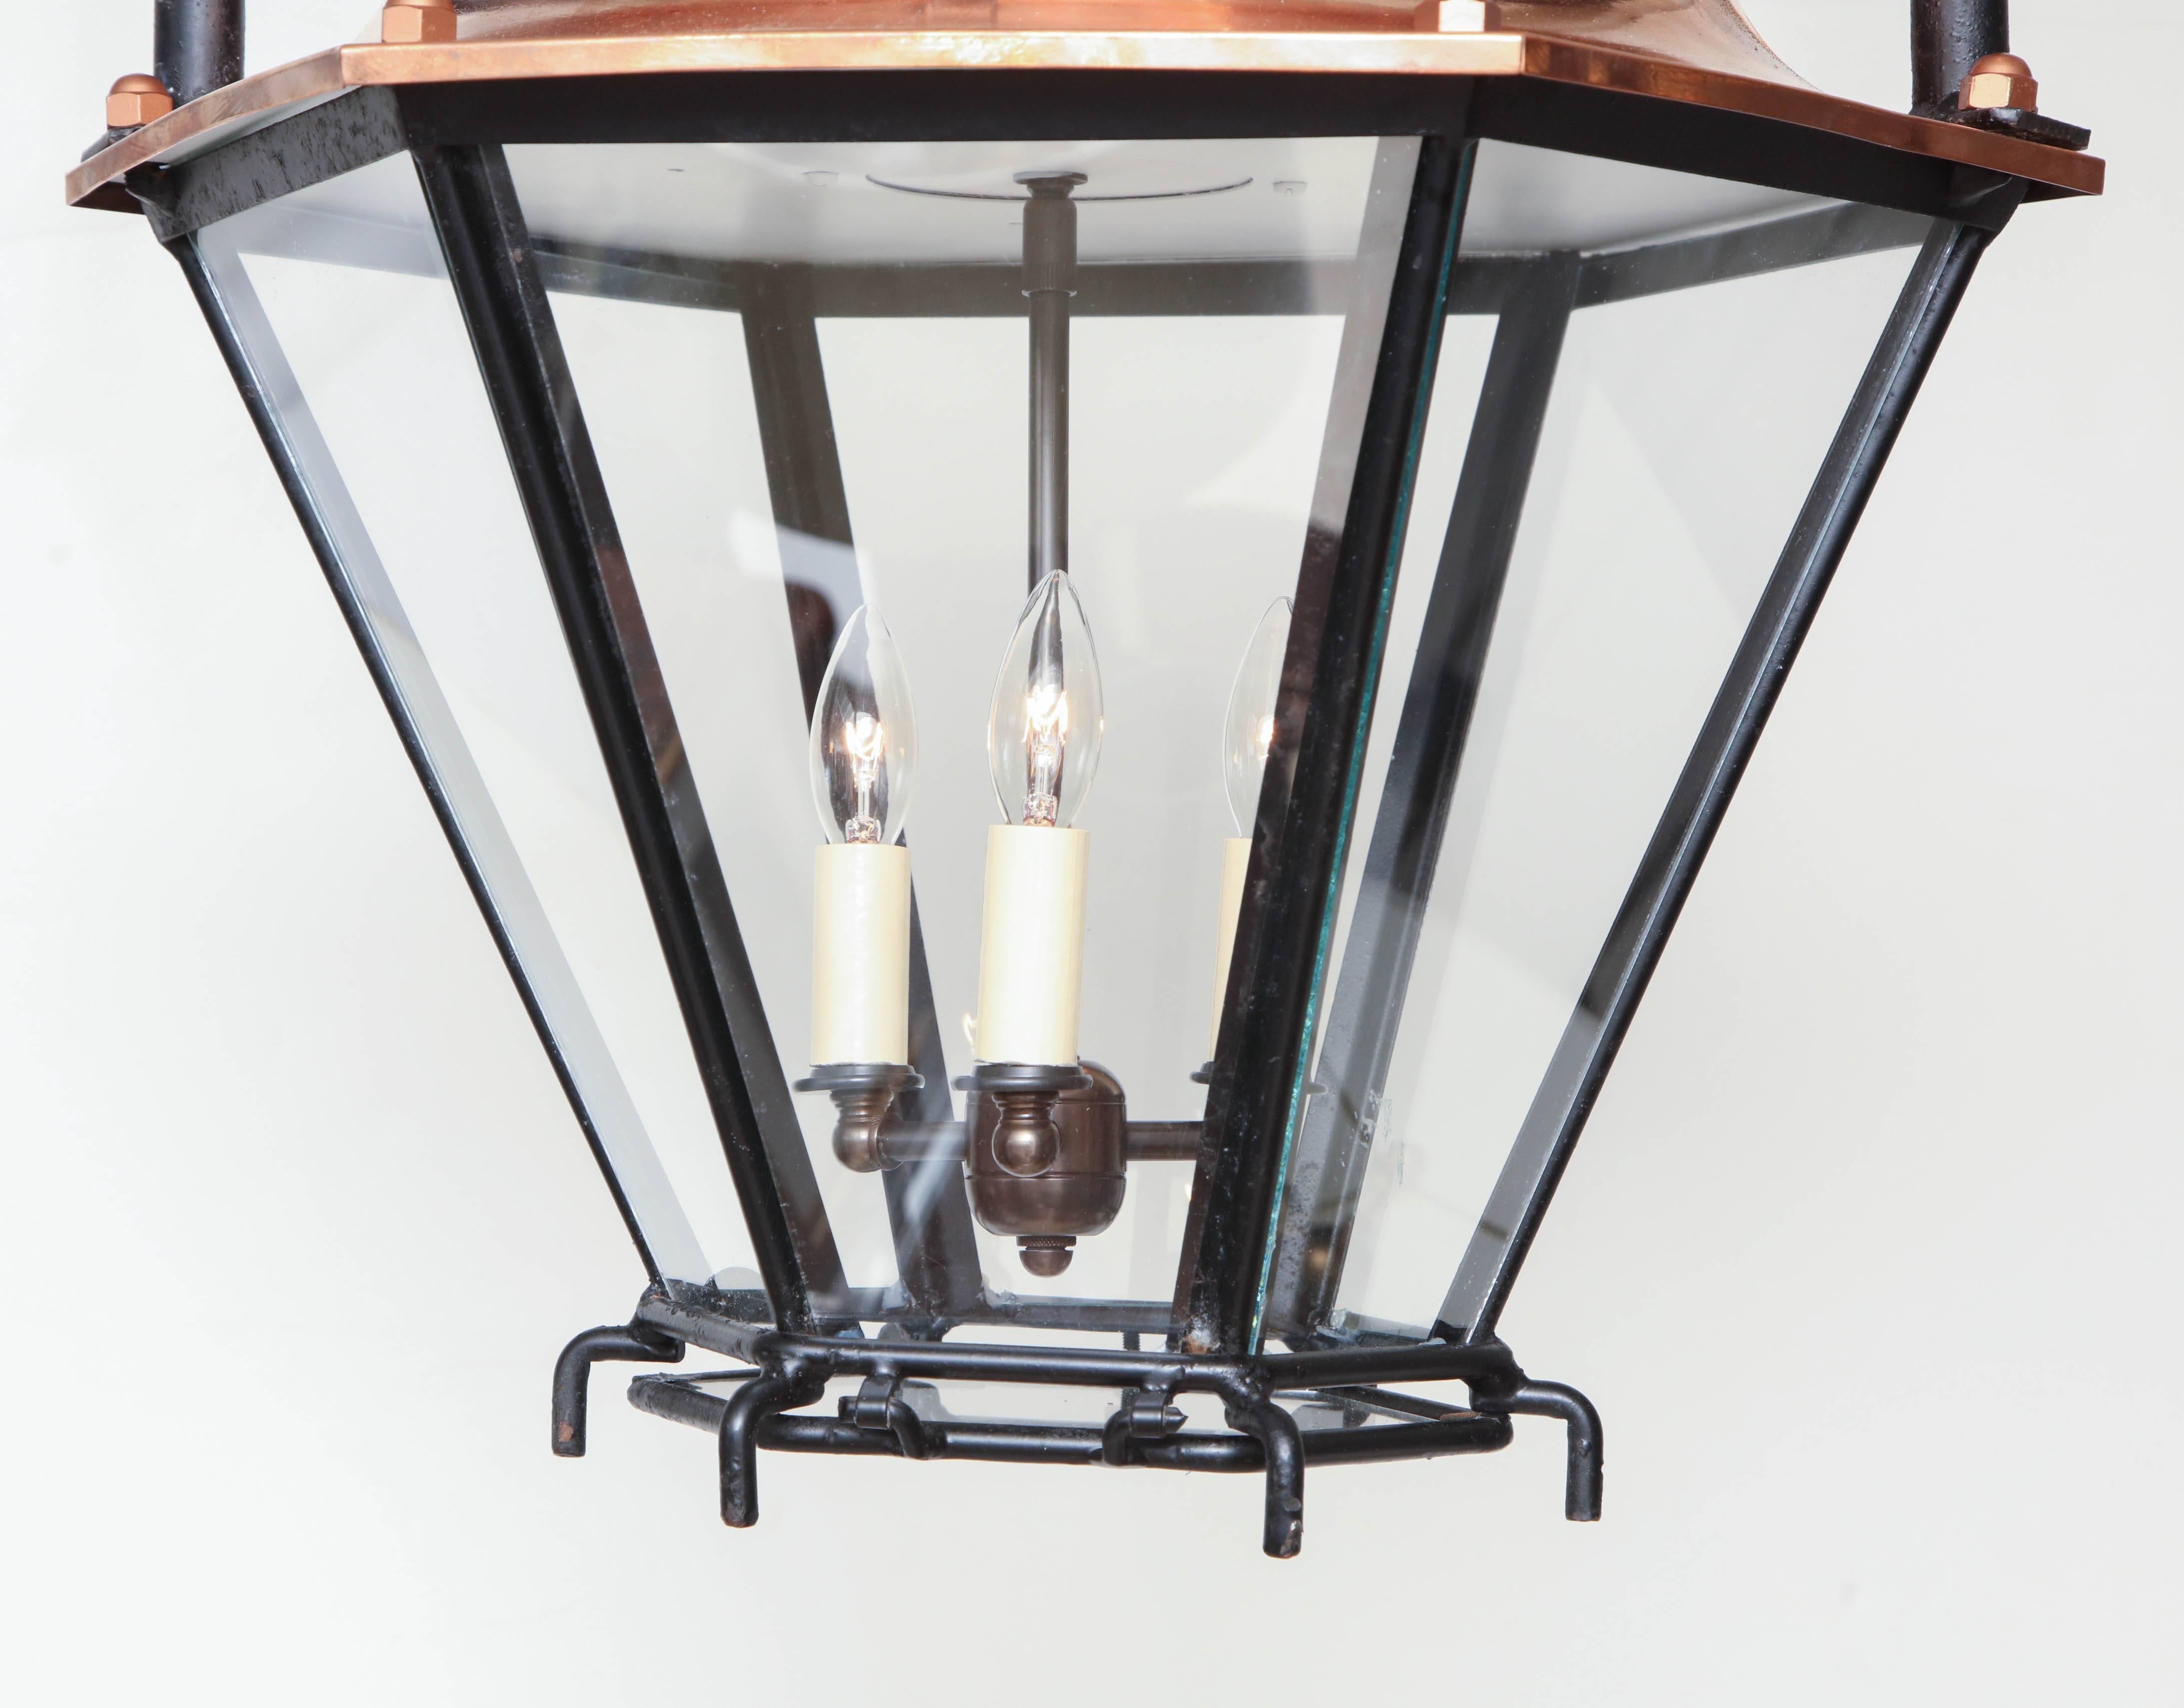 20th Century Copper and Glass Lantern/Pendant with Iron Ring Hanger, circa 1900 For Sale 2